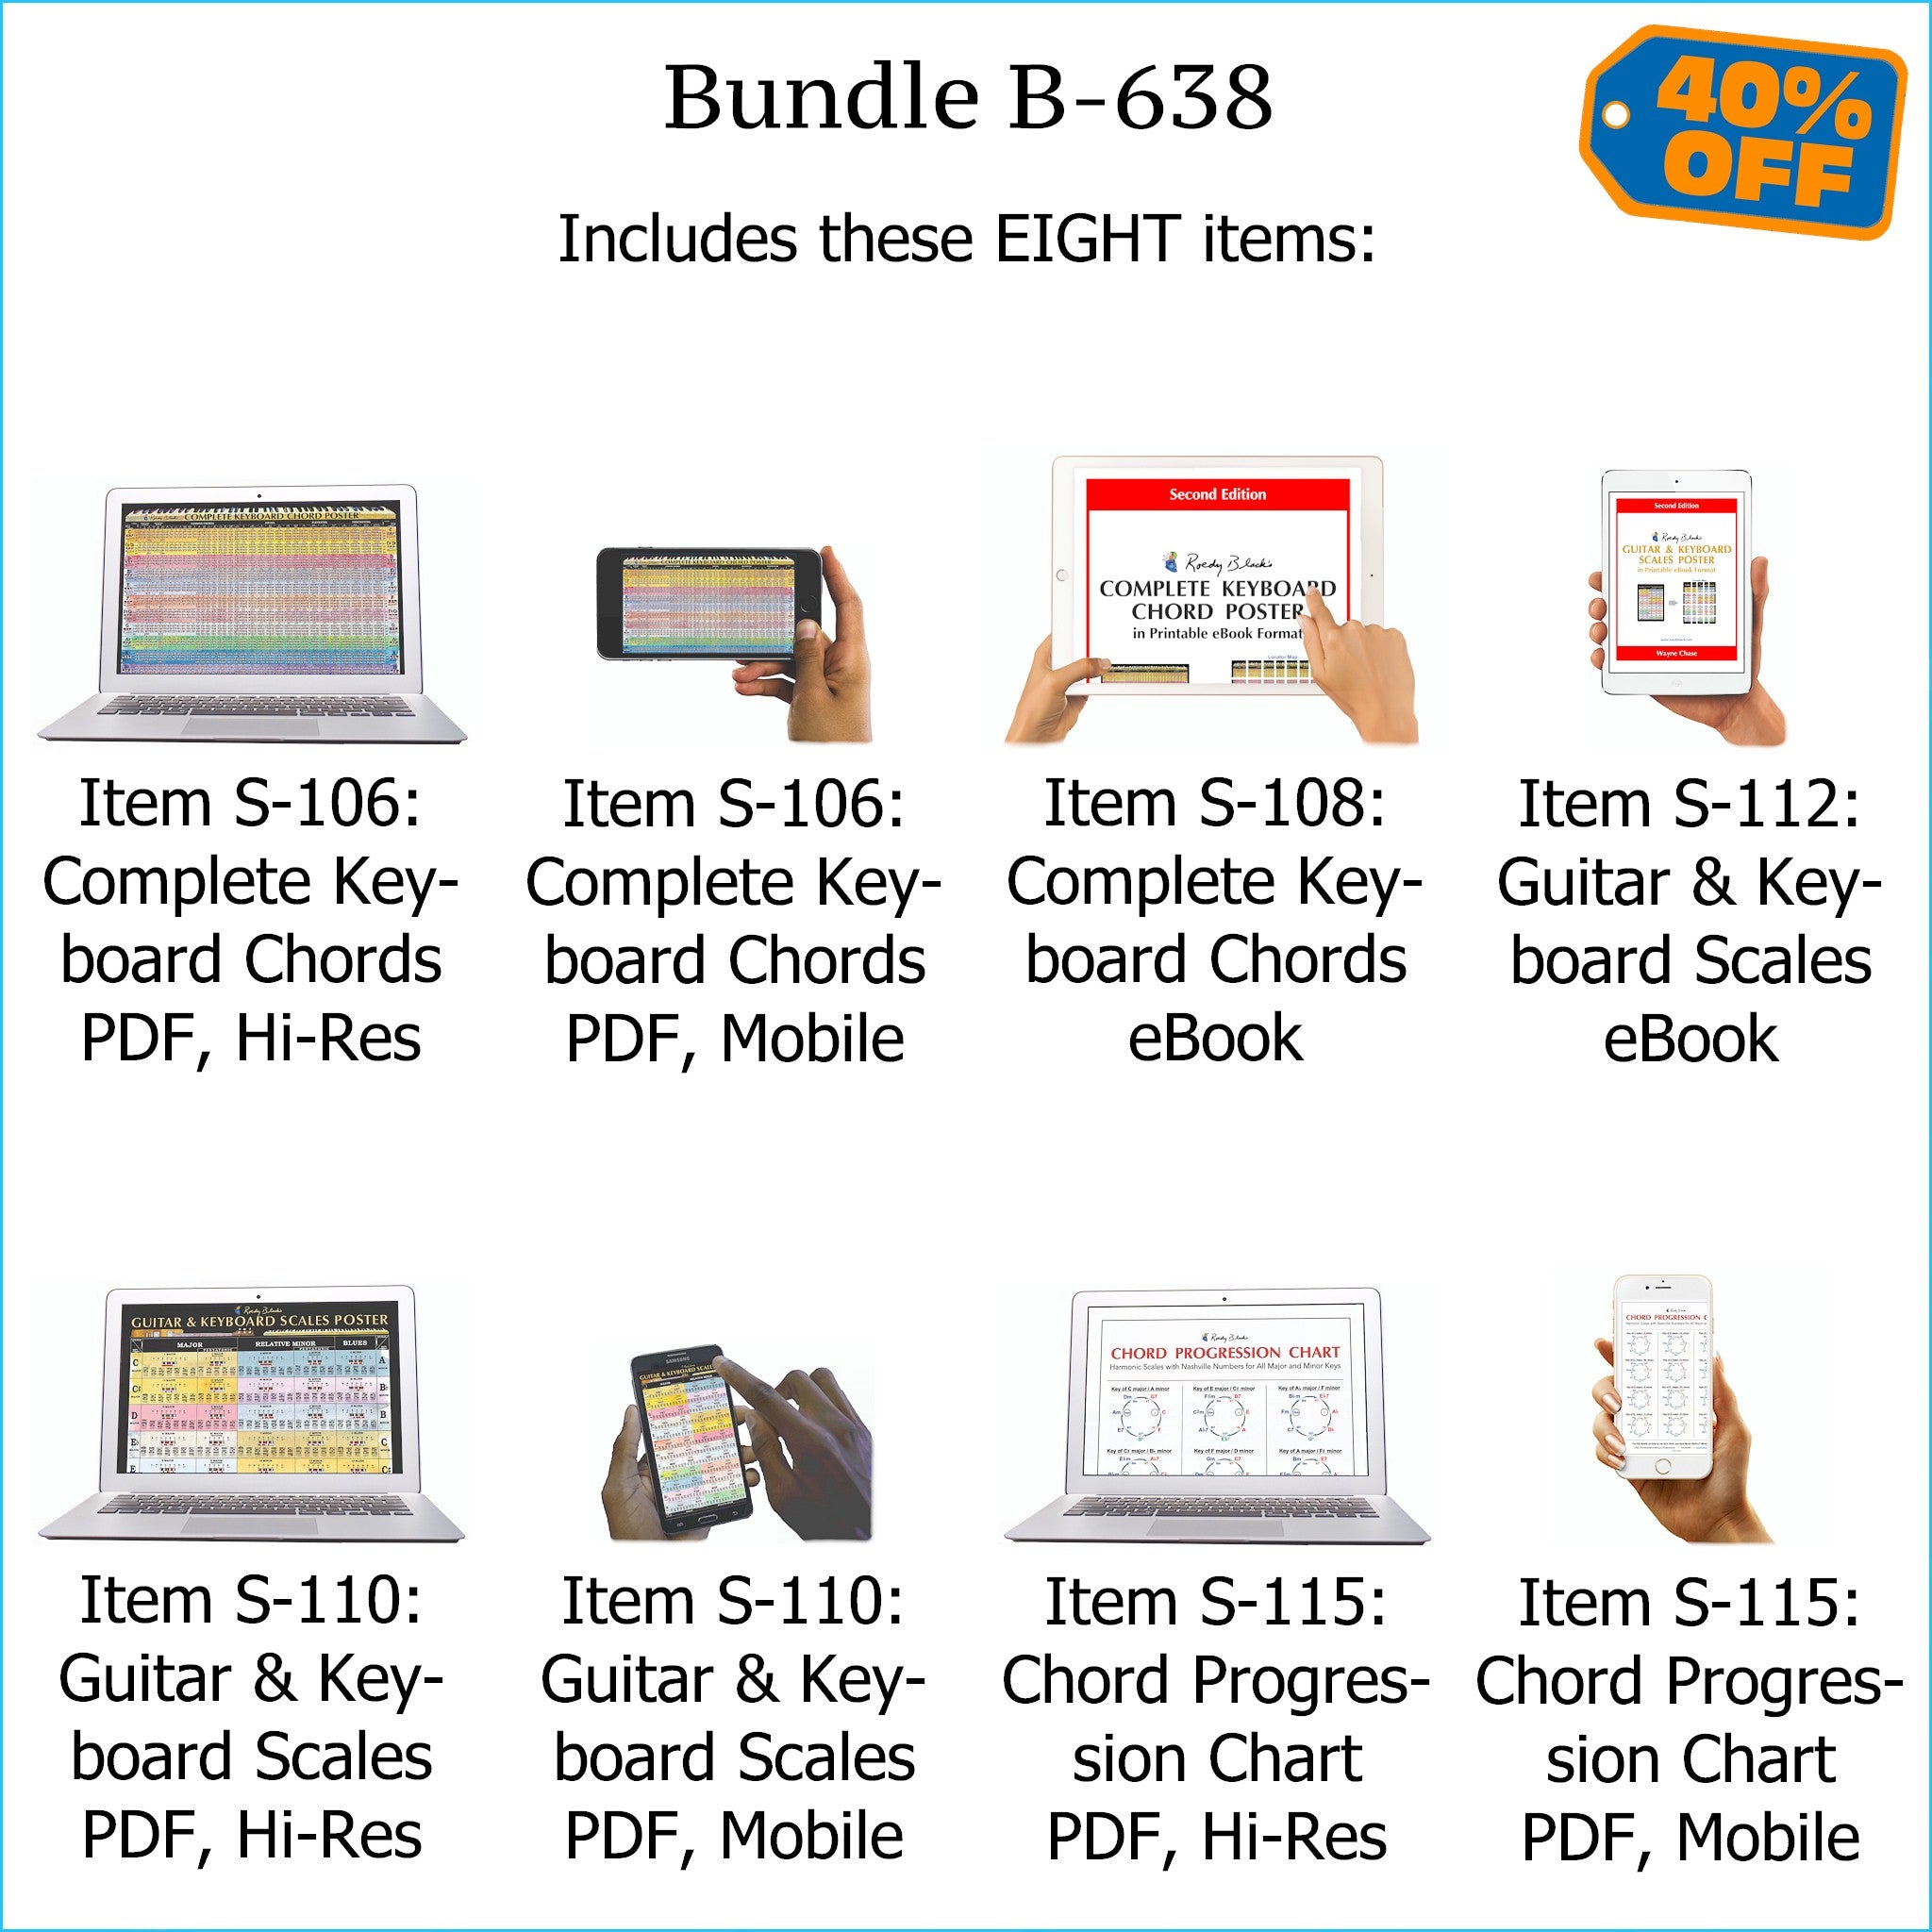 Bundle B-638: Complete Keyboard Chords, Scales, Chord Progressions - E-Posters and Printable E-Books. FREE Download Protection.